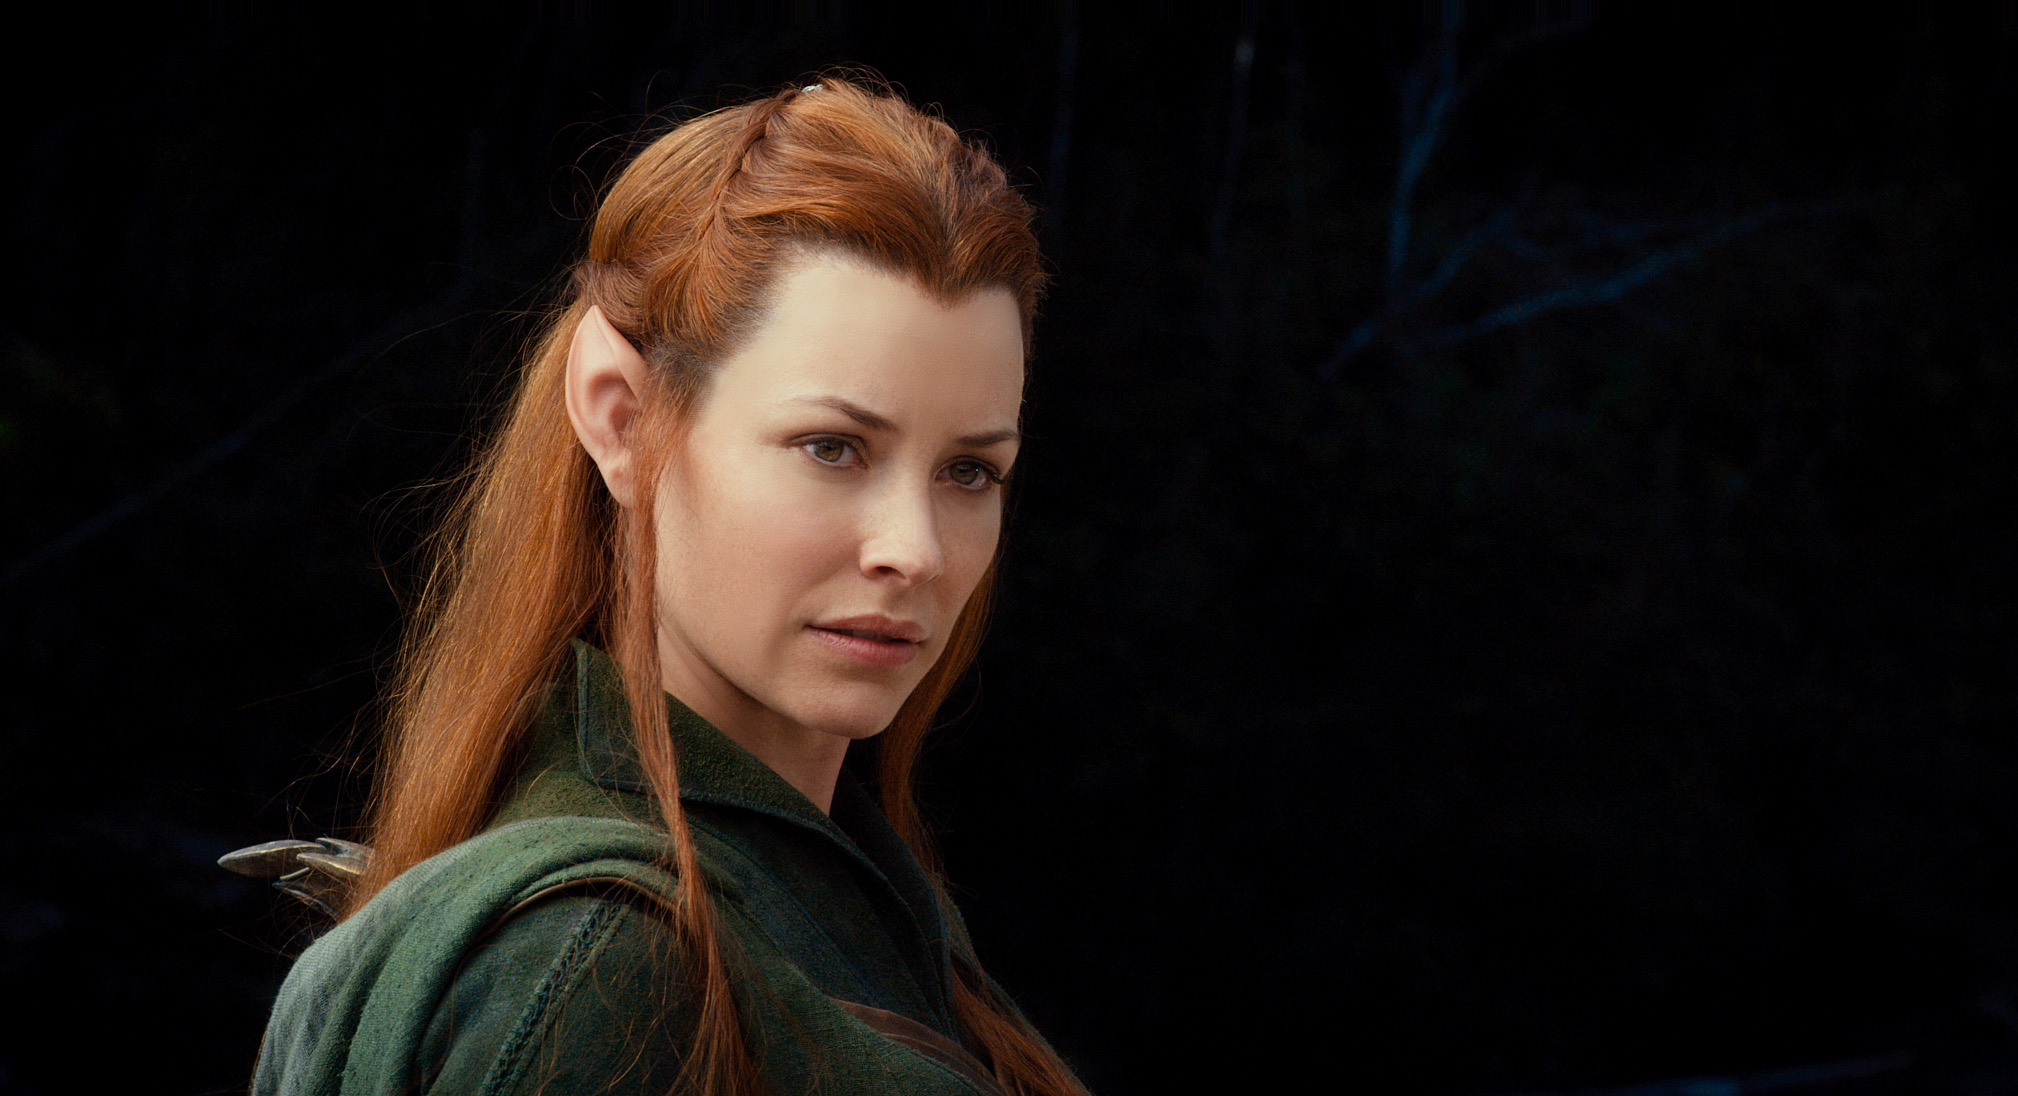 People 2018x1096 The Hobbit Tauriel The Hobbit: The Desolation of Smaug movies fantasy girl Evangeline Lilly Canadian women women actress redhead pointy ears long hair dark background face film stills